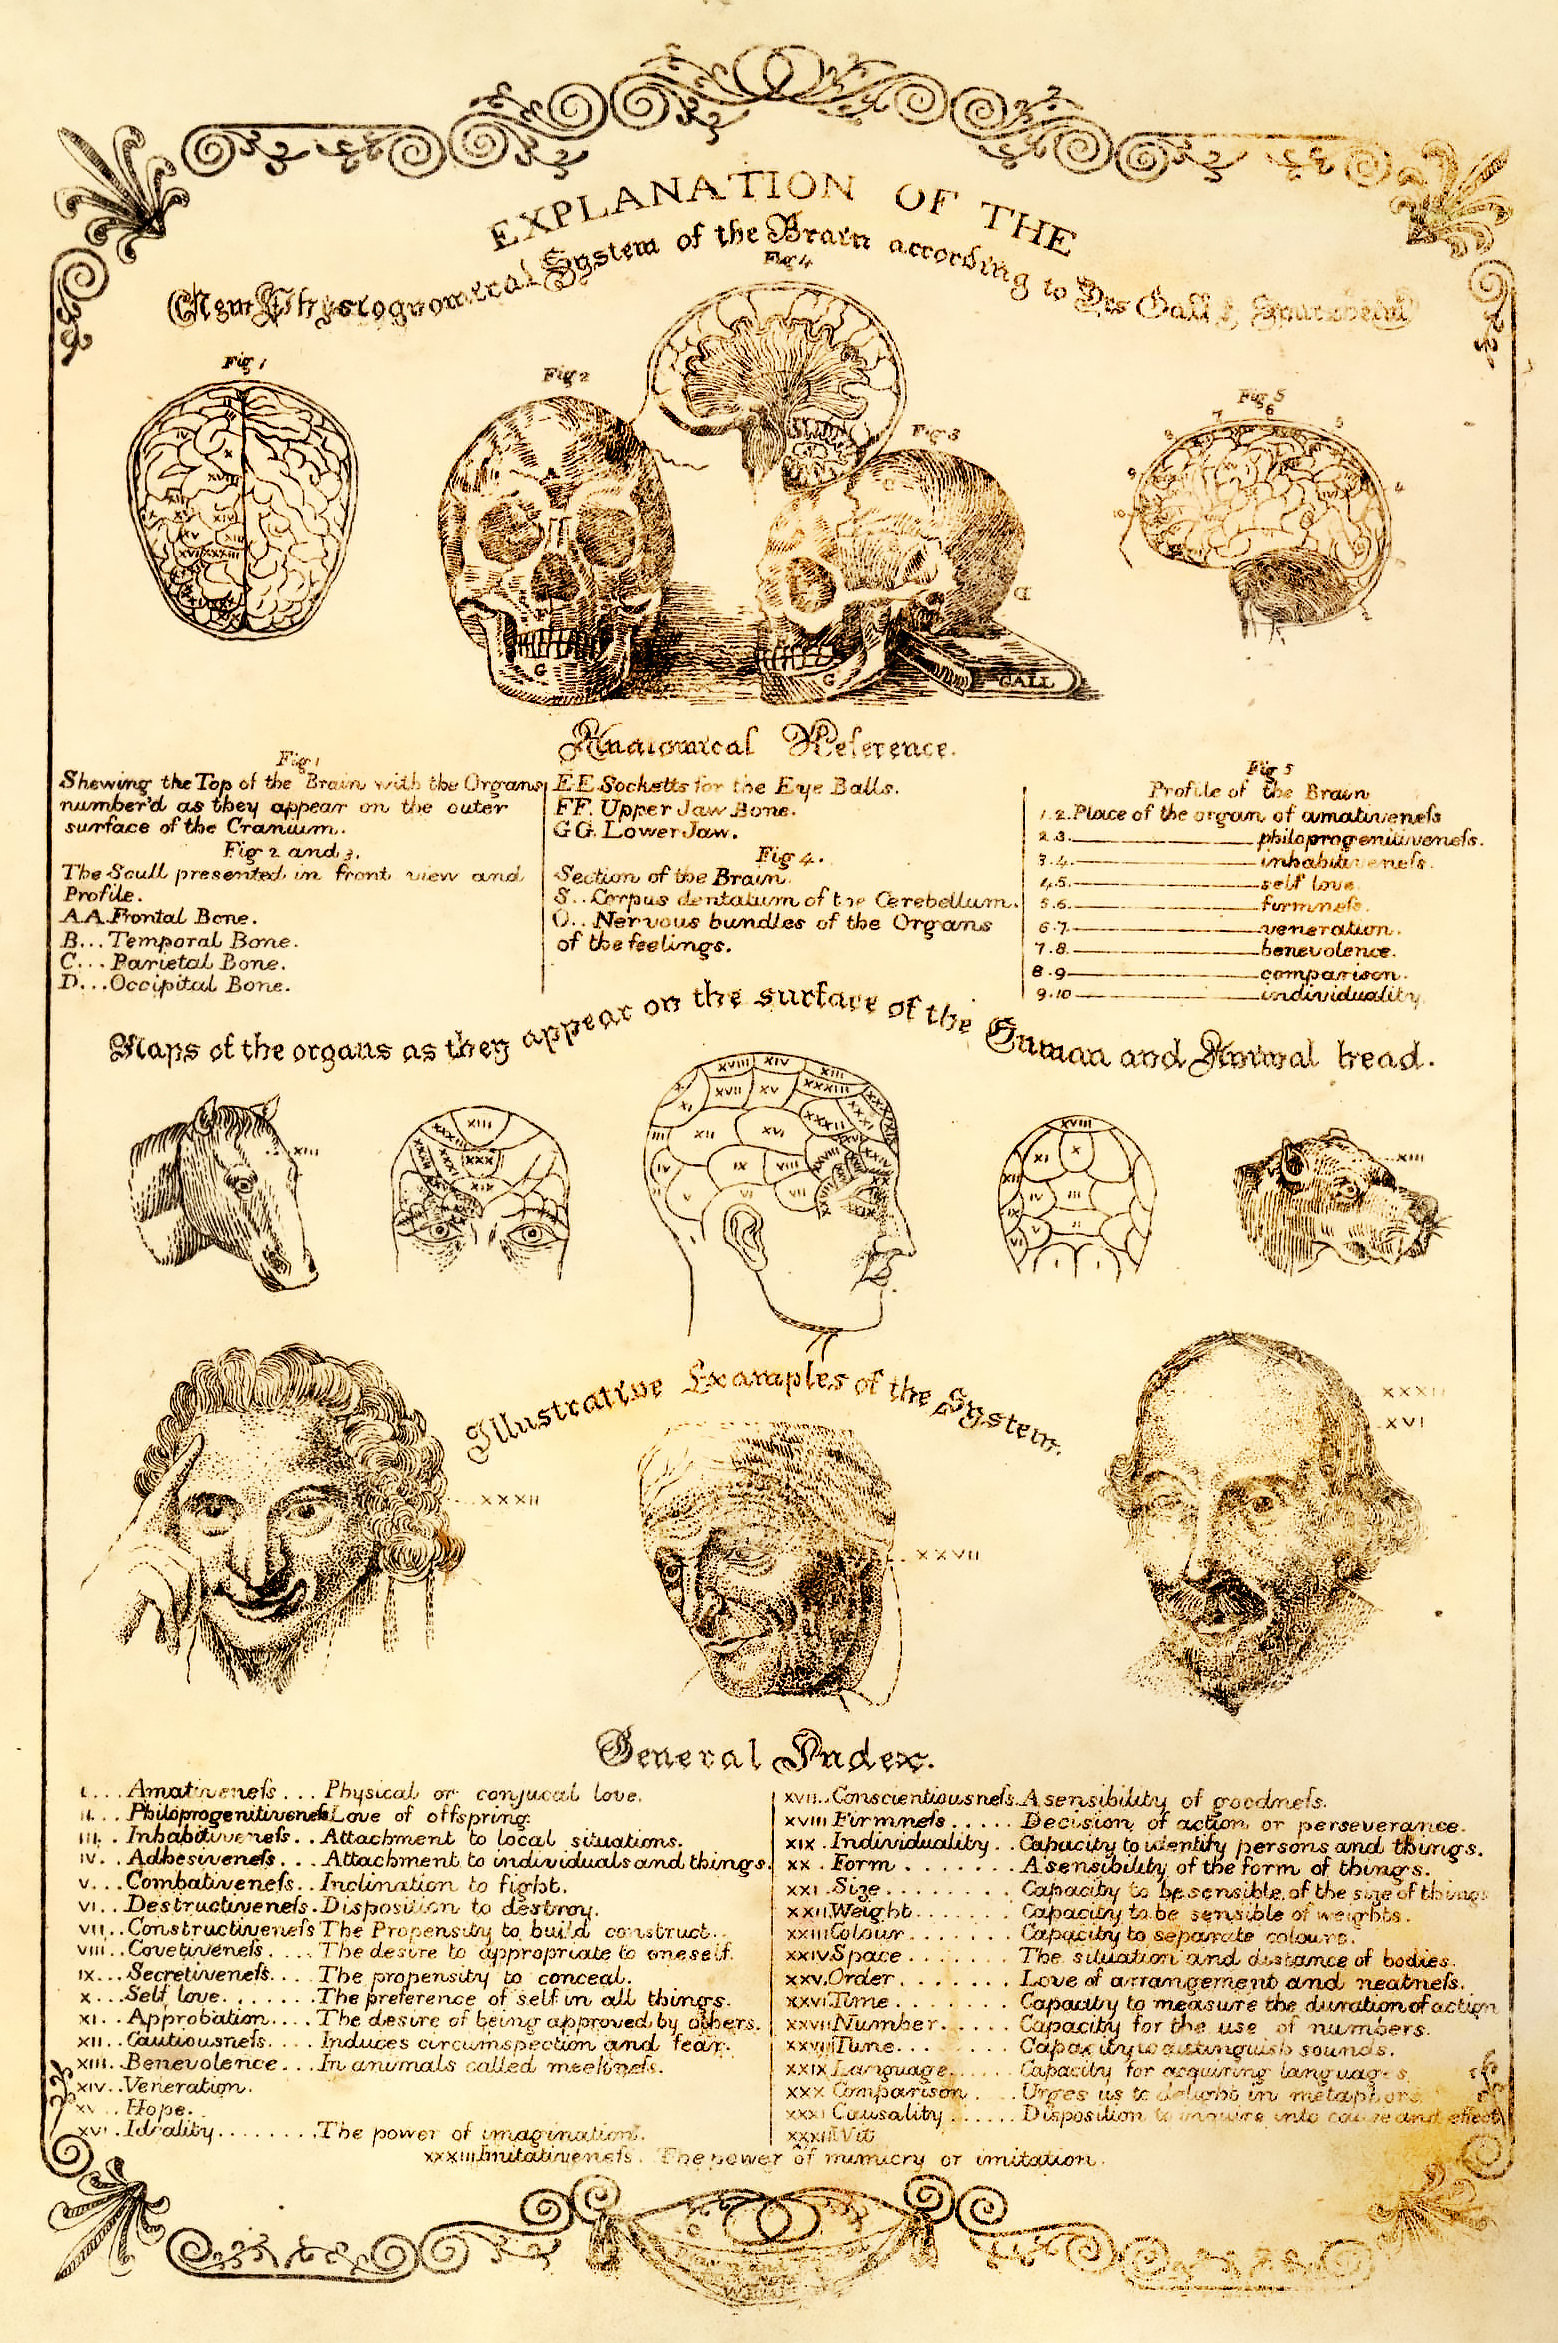 An old scientific poster explaining the anatomy of the human brain, with illustrations and text. The poster is yellowed and has a decorative border. The title reads “Explanation of the …”. The poster shows the skull from different angles and perspectives, such as the top, the side, the front, and the back.